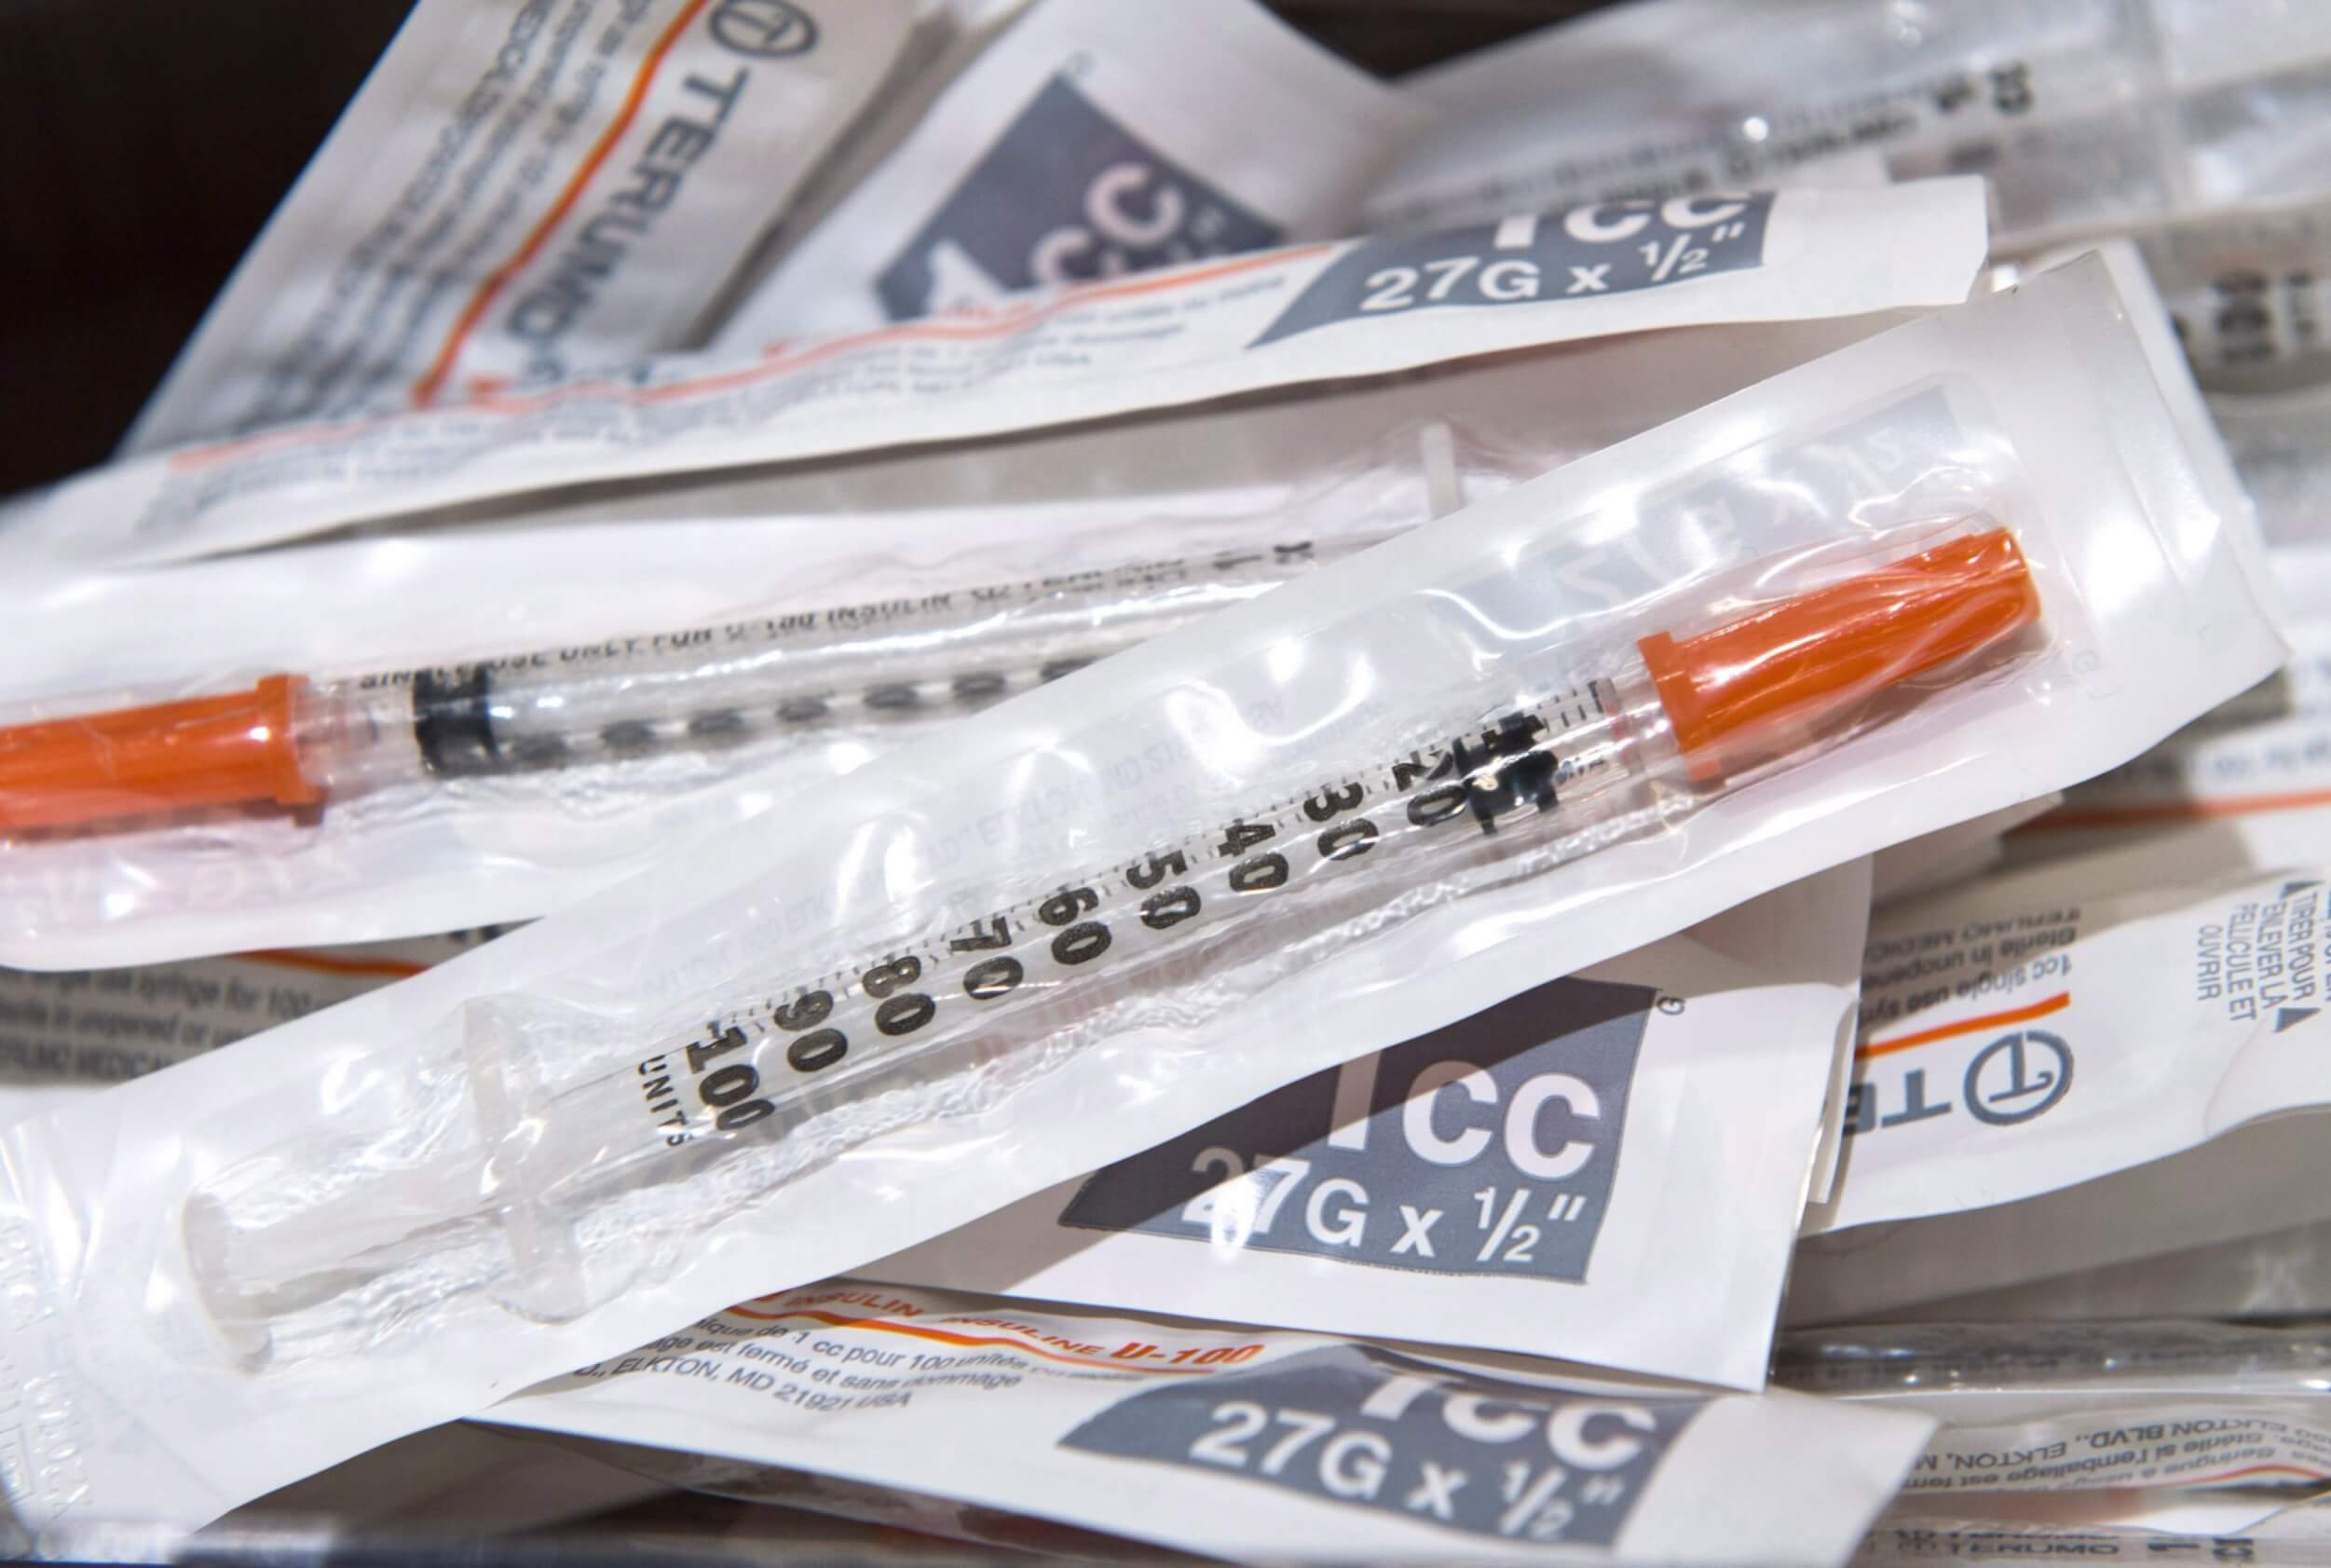 Syringes in plastic wrapping